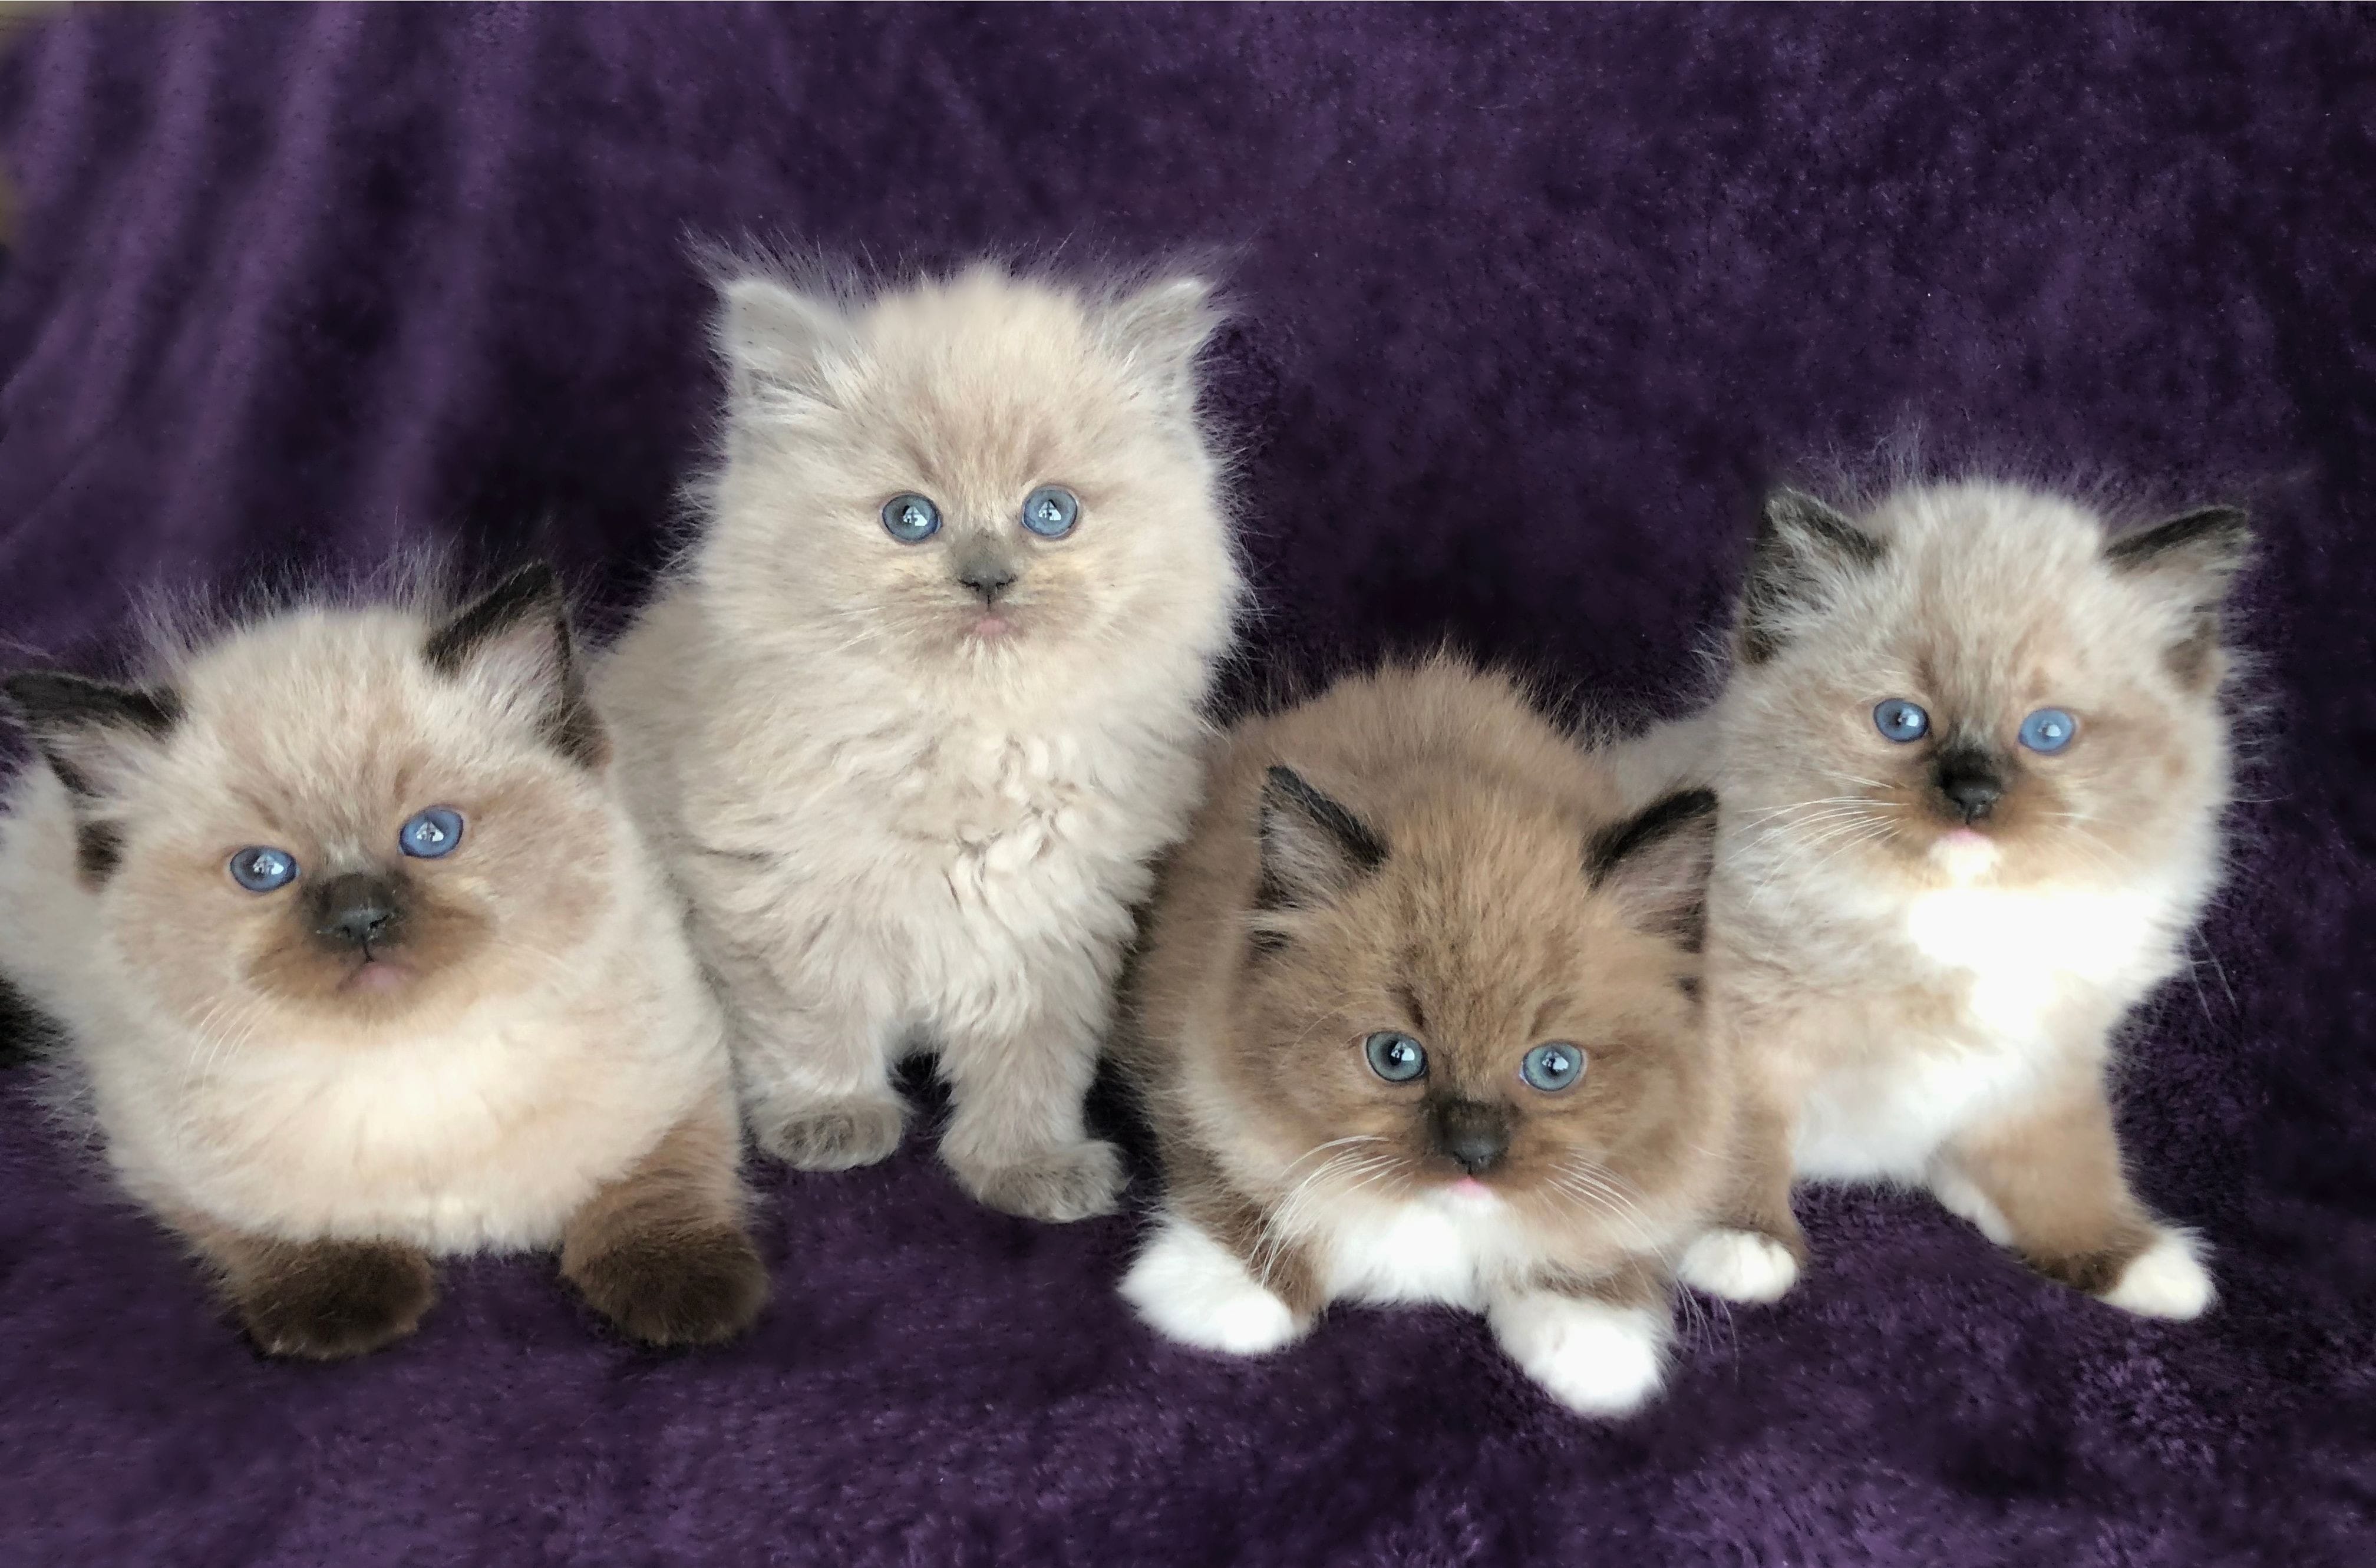 Our ragdoll kittens are fabulous emotional support cats